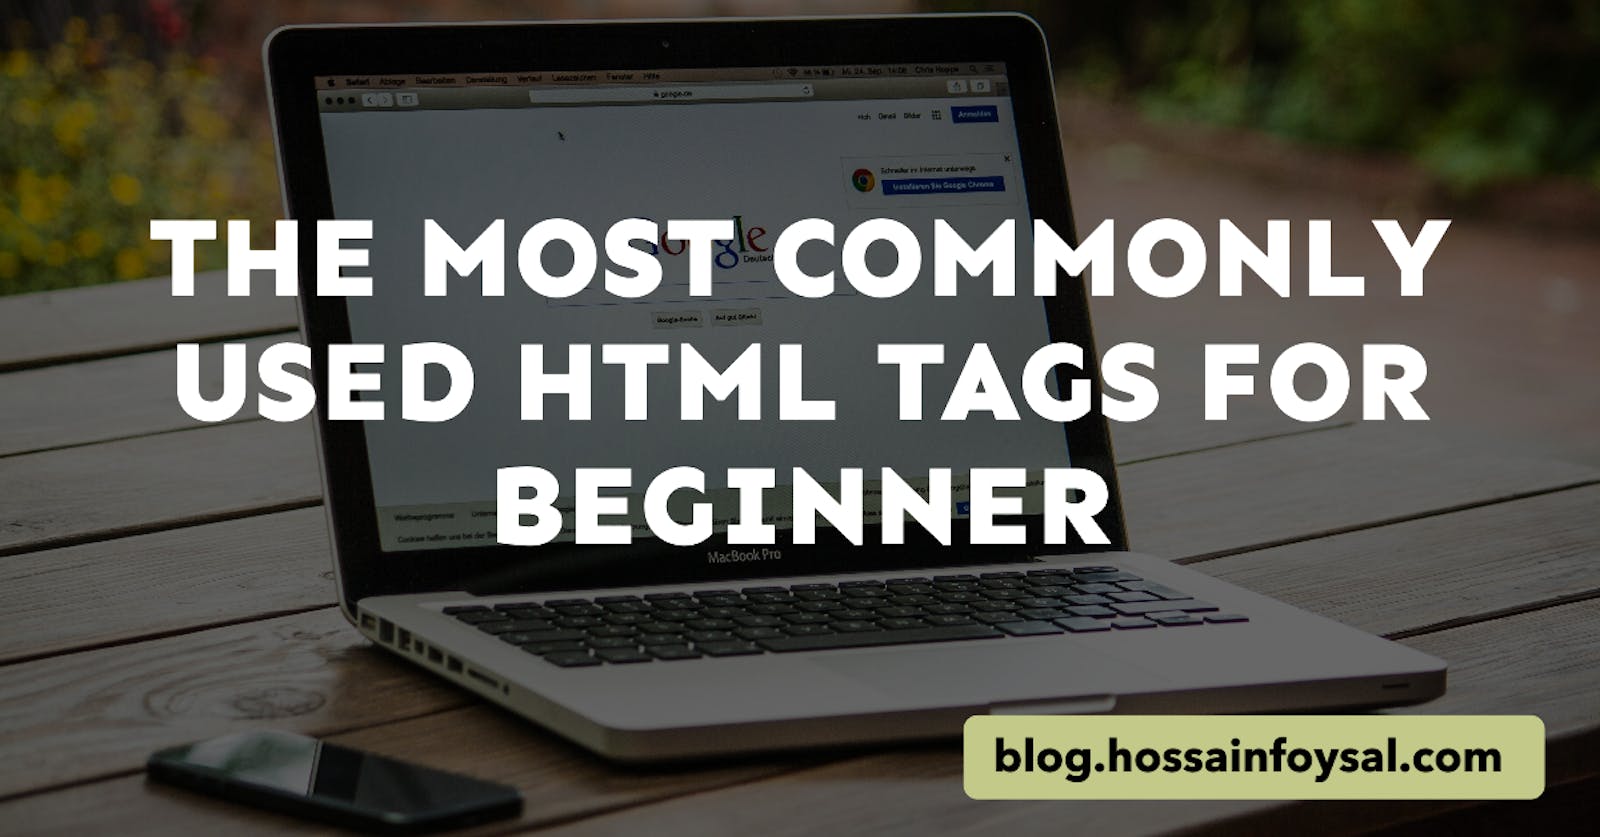 The Most Commonly Used HTML Tags for beginner